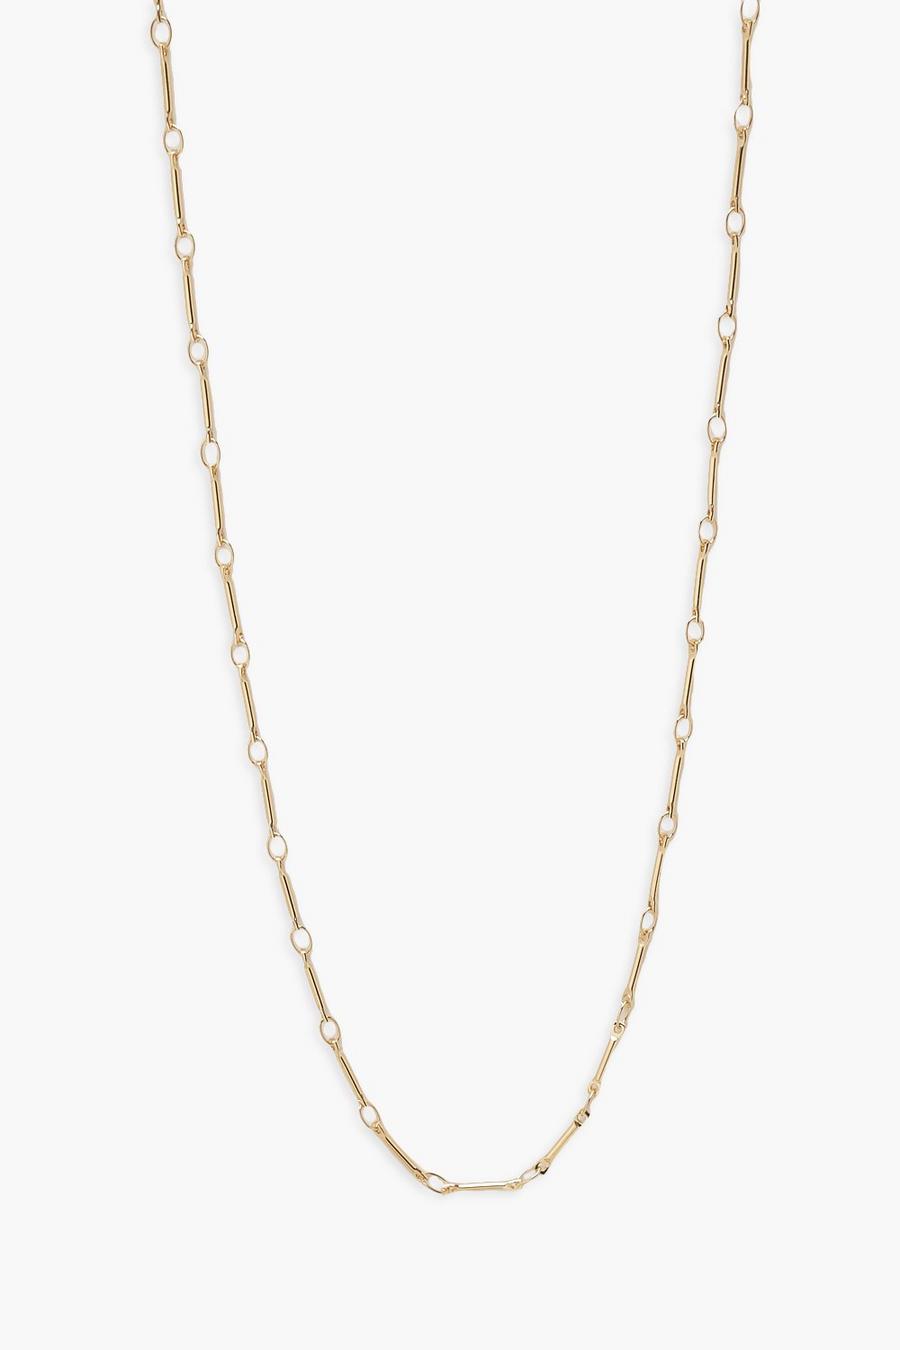 Gold metallic Simple Long Link Necklace